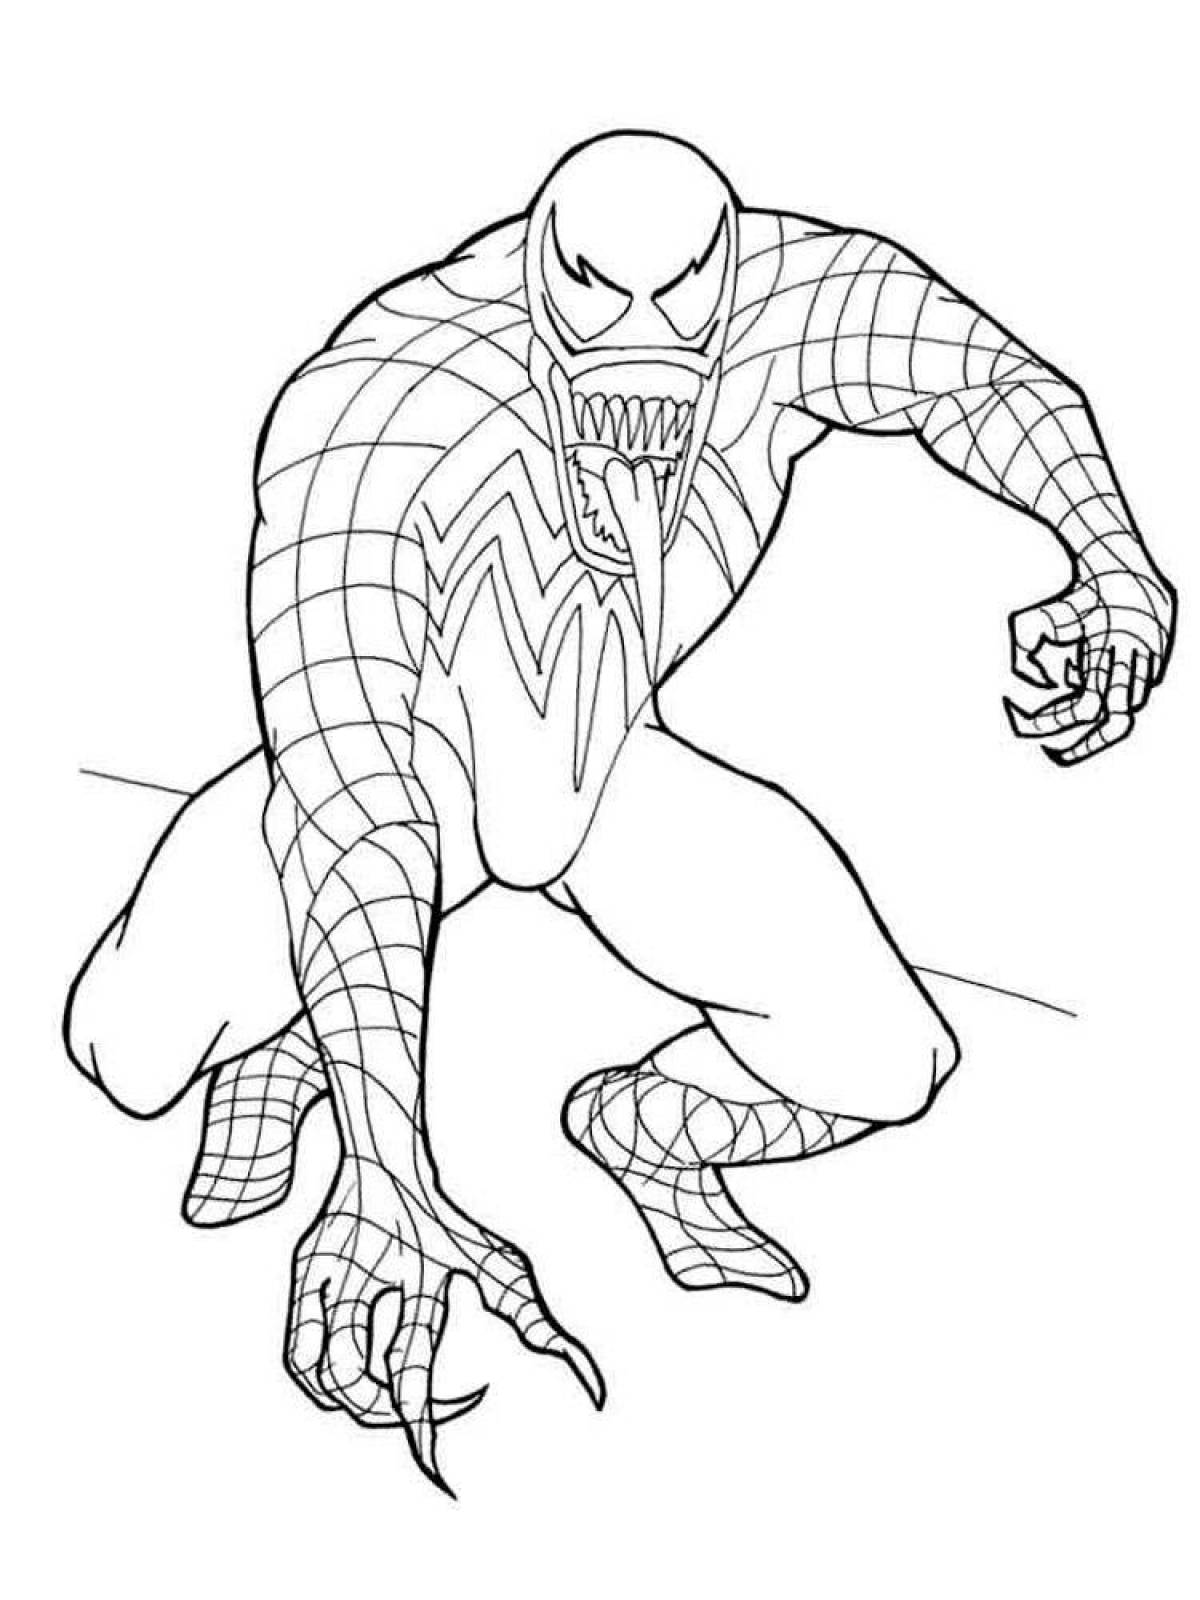 Spider-Man and Venom Rampant Coloring Page